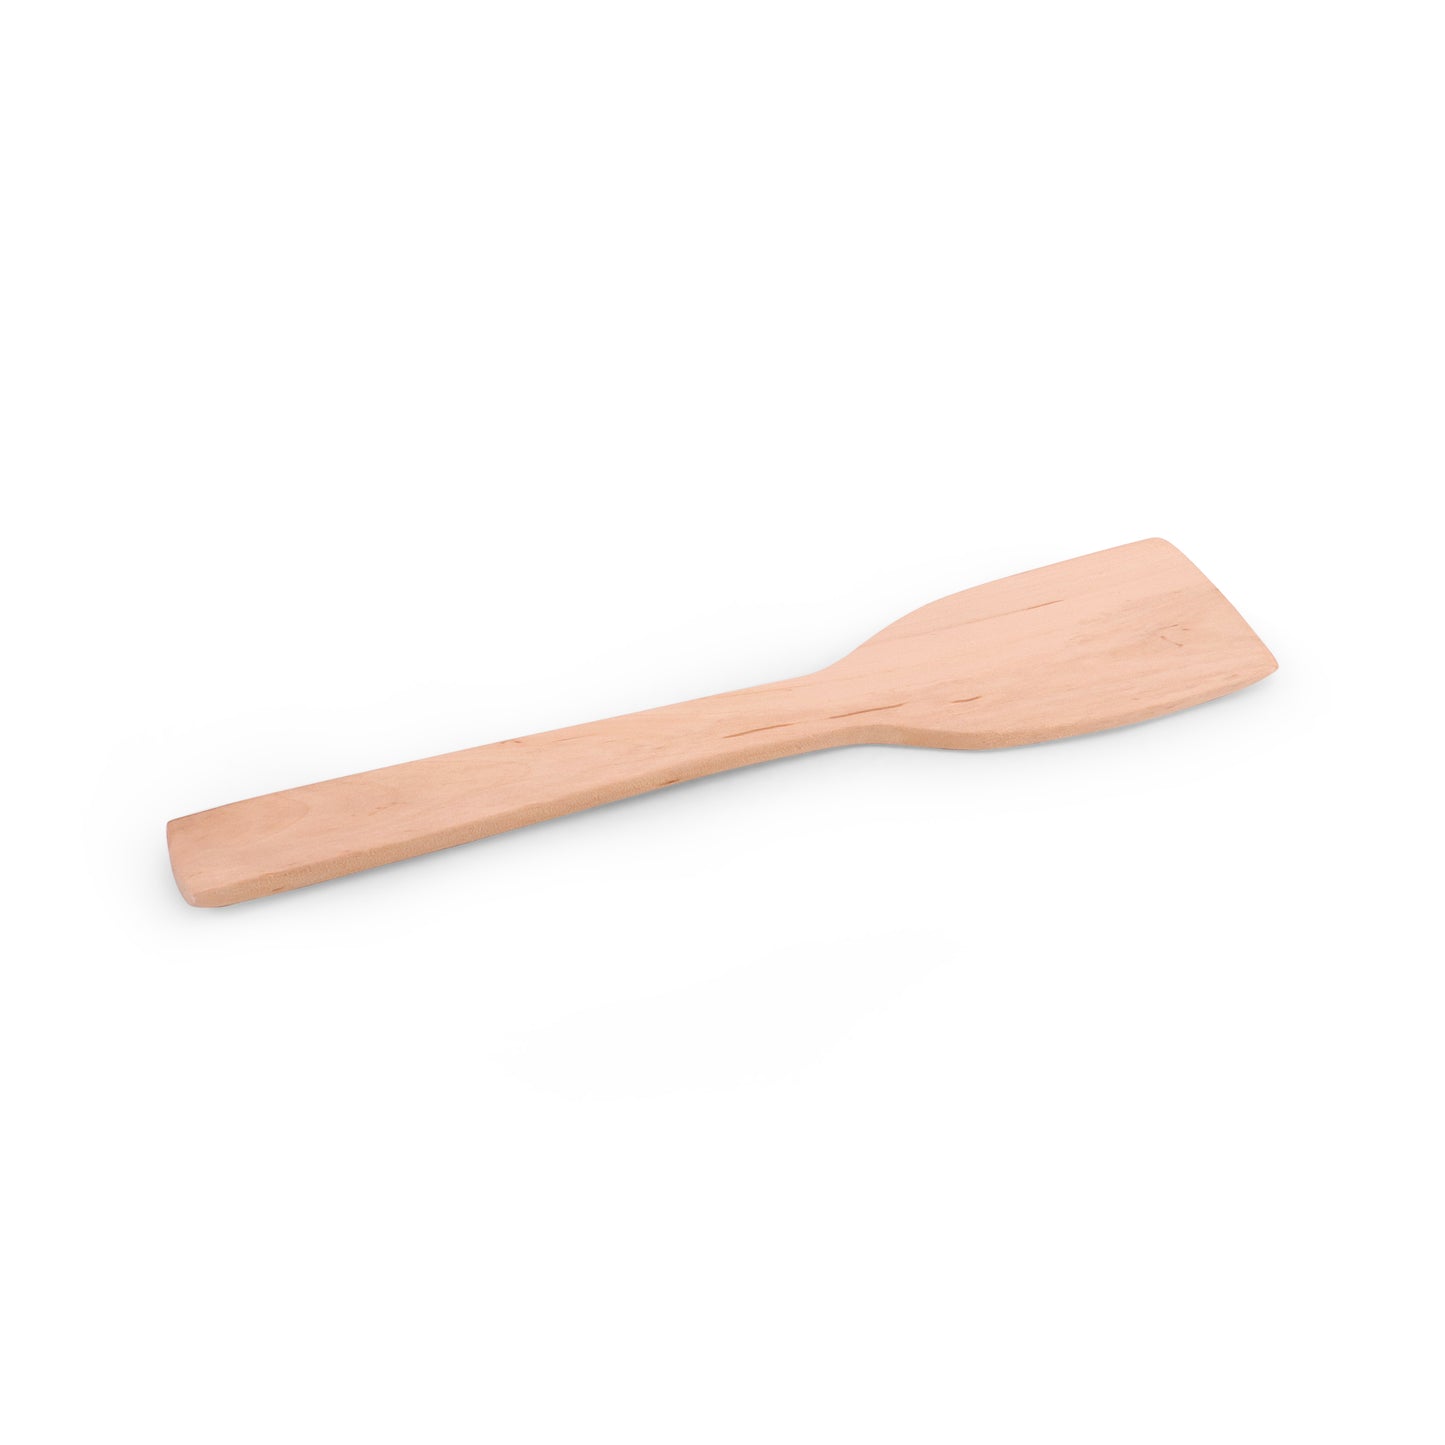 Hand-Carved Wooden Spoon. Pattern: Small Shovel